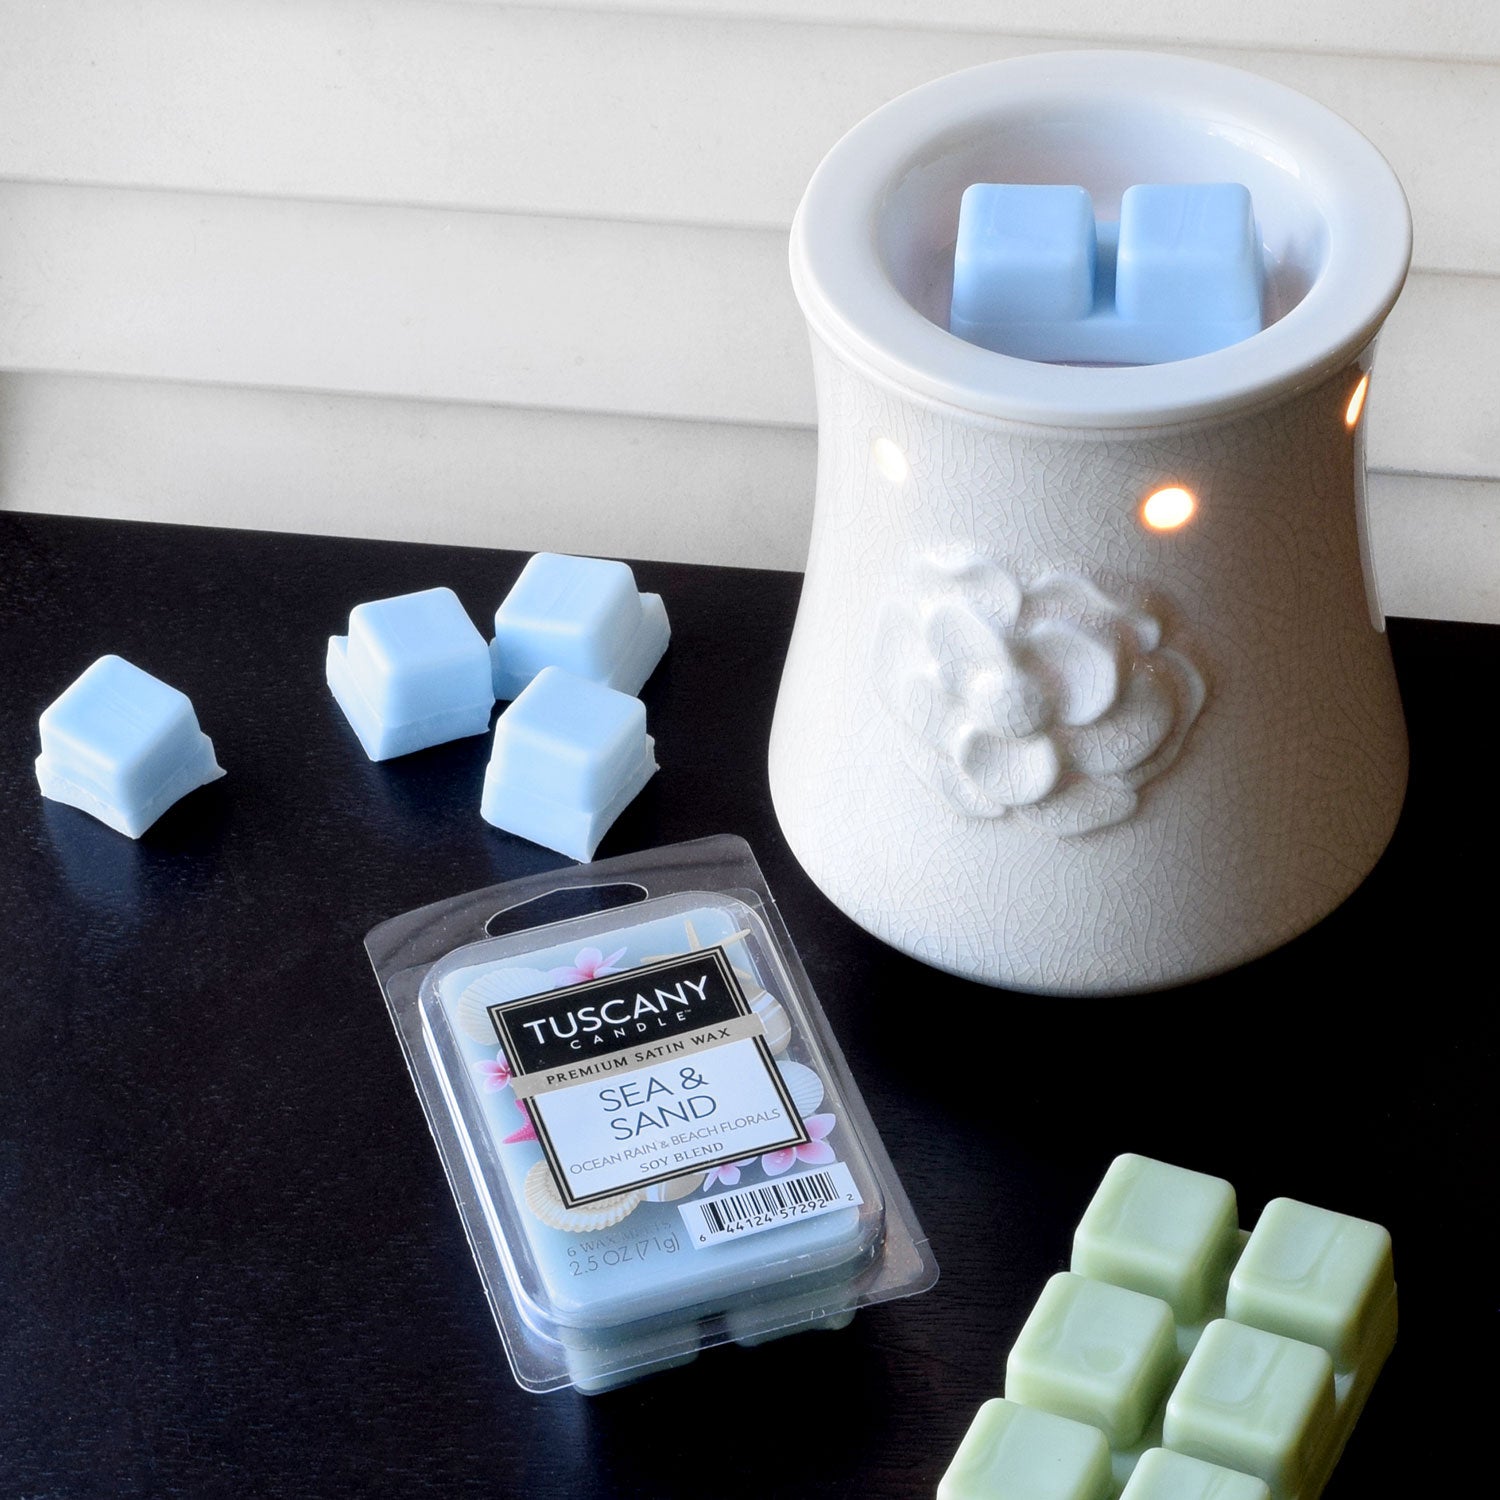 A light blue Sea & Sand tart bar is shown being used in one of our ceramic wax melt warmers